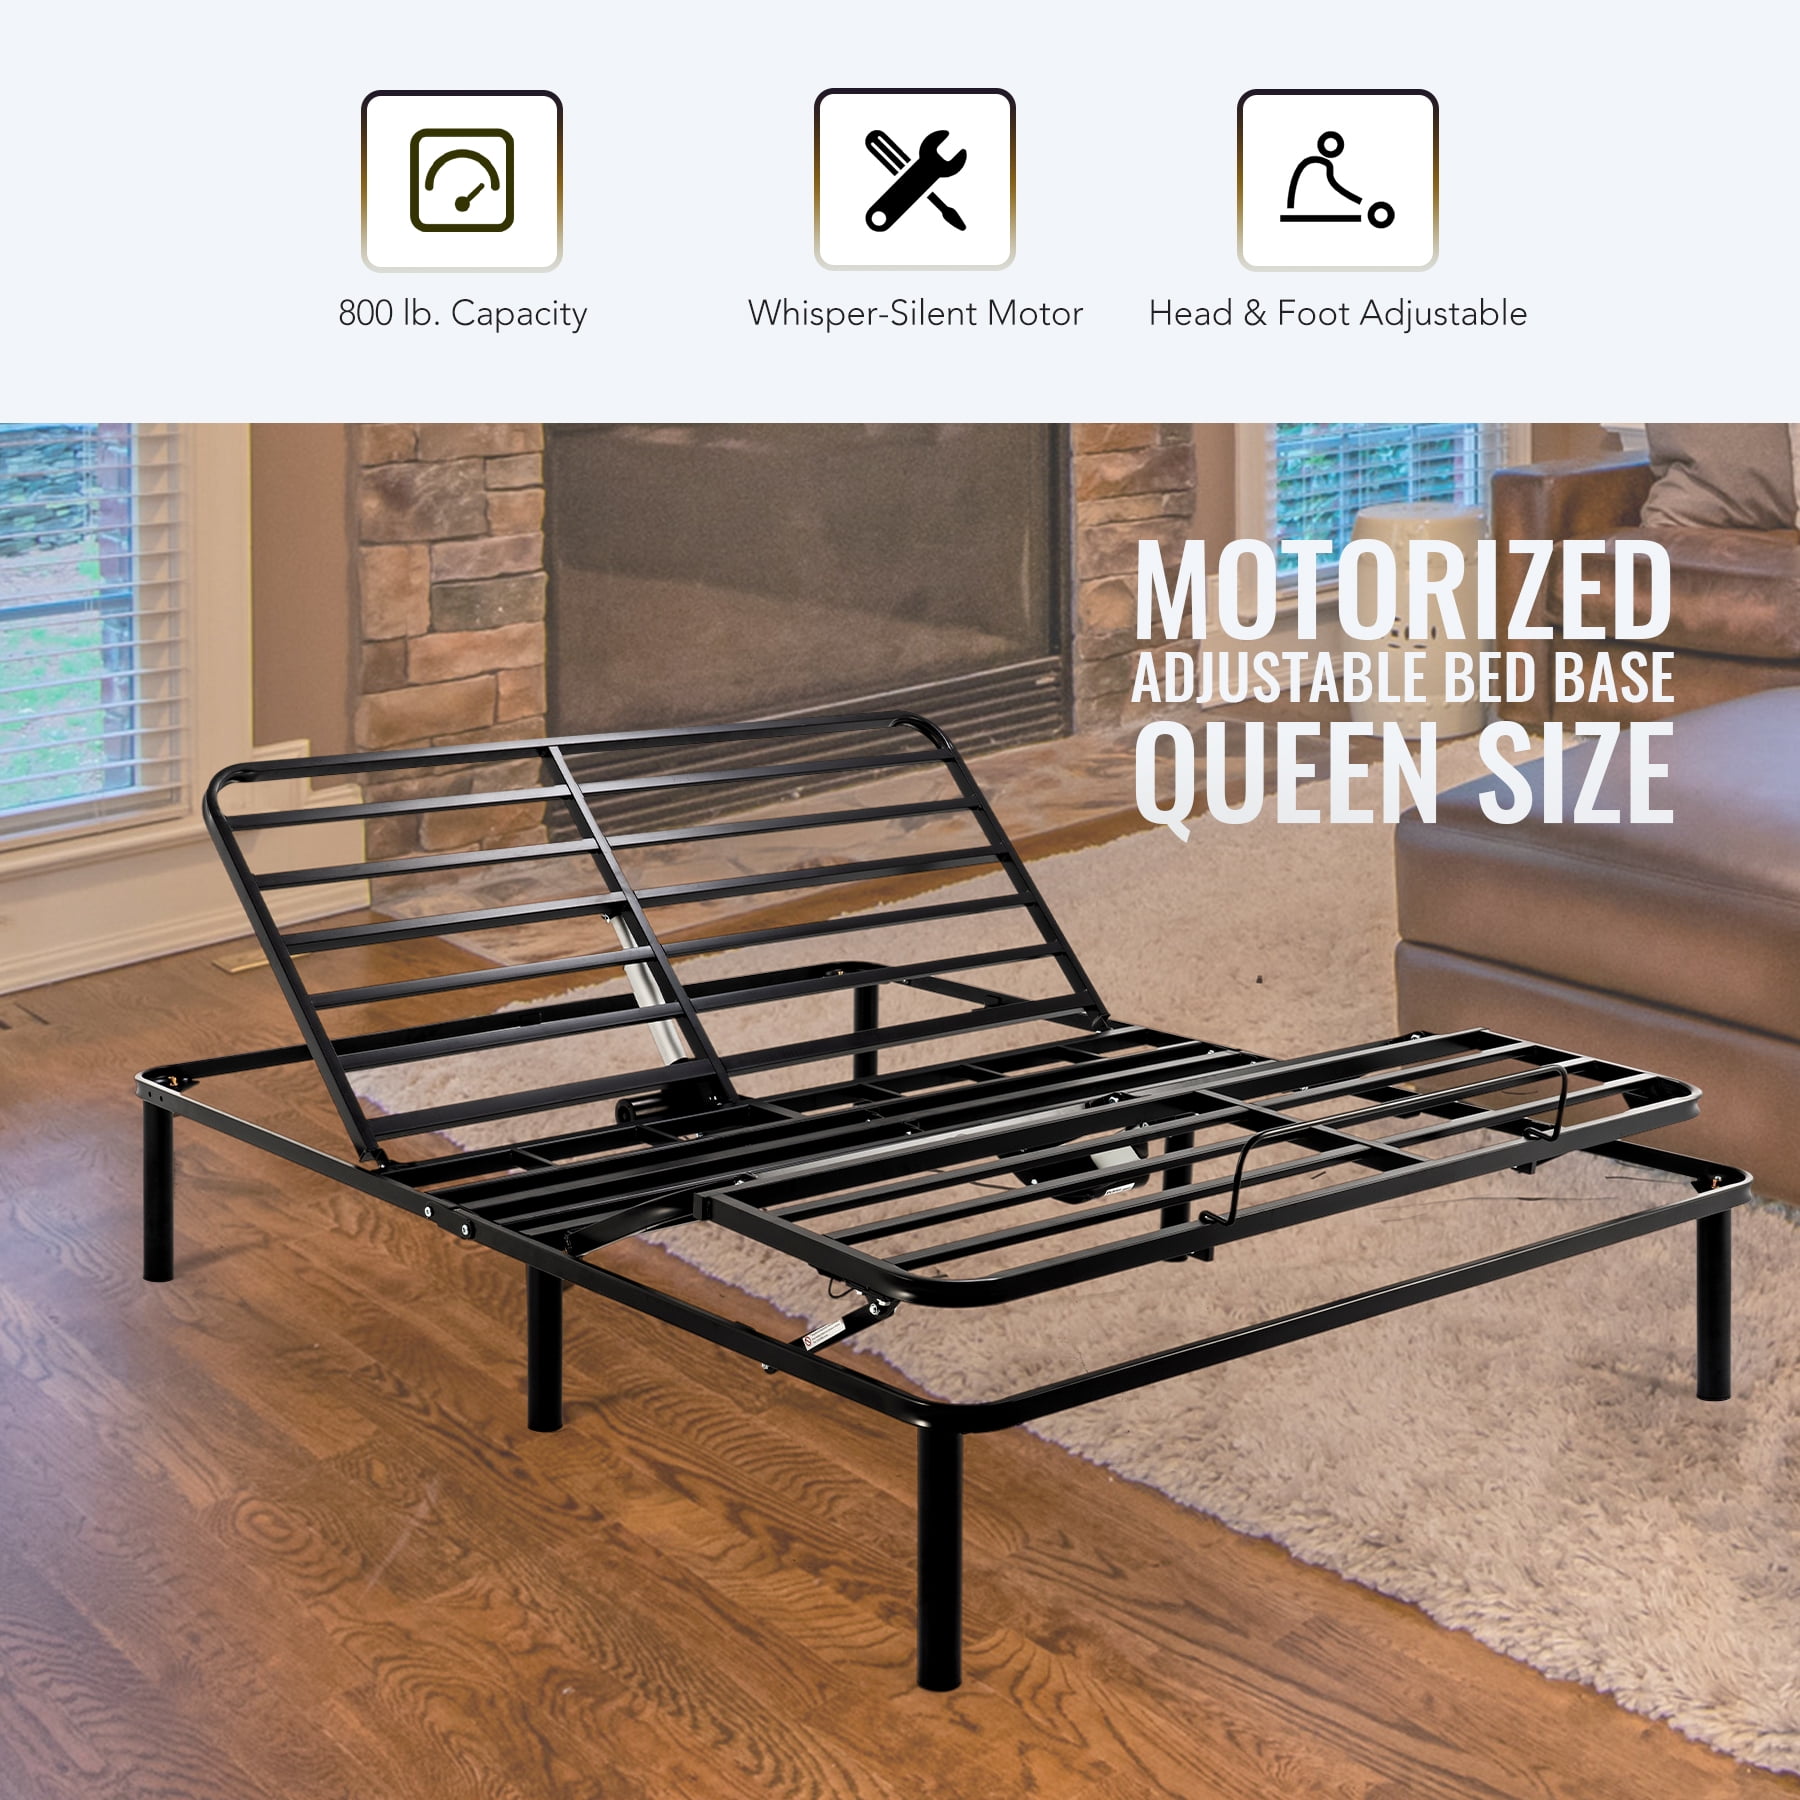 Adjustable Queen Size Electric Bed, Motorized Bed Frames